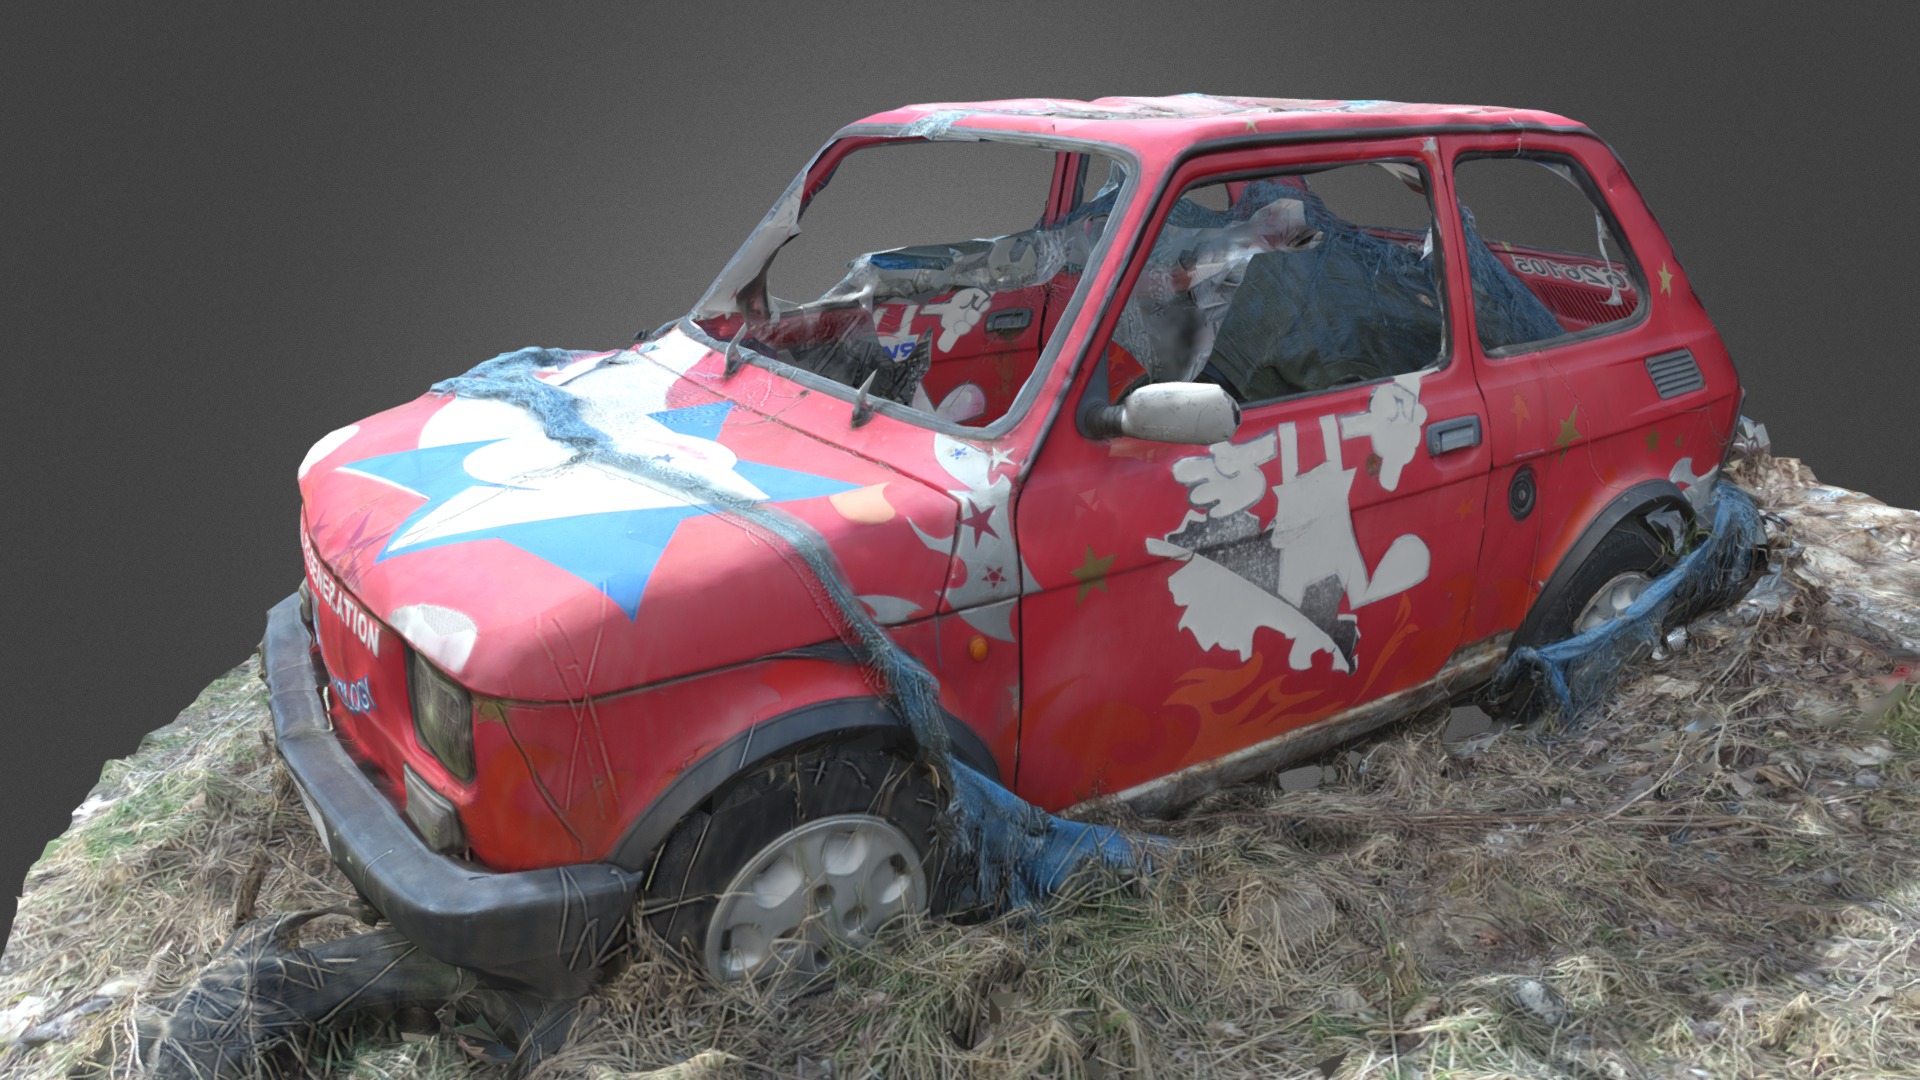 3D model Fiat 126p Abandoned Car - This is a 3D model of the Fiat 126p Abandoned Car. The 3D model is about a red car with a cartoon character on it.